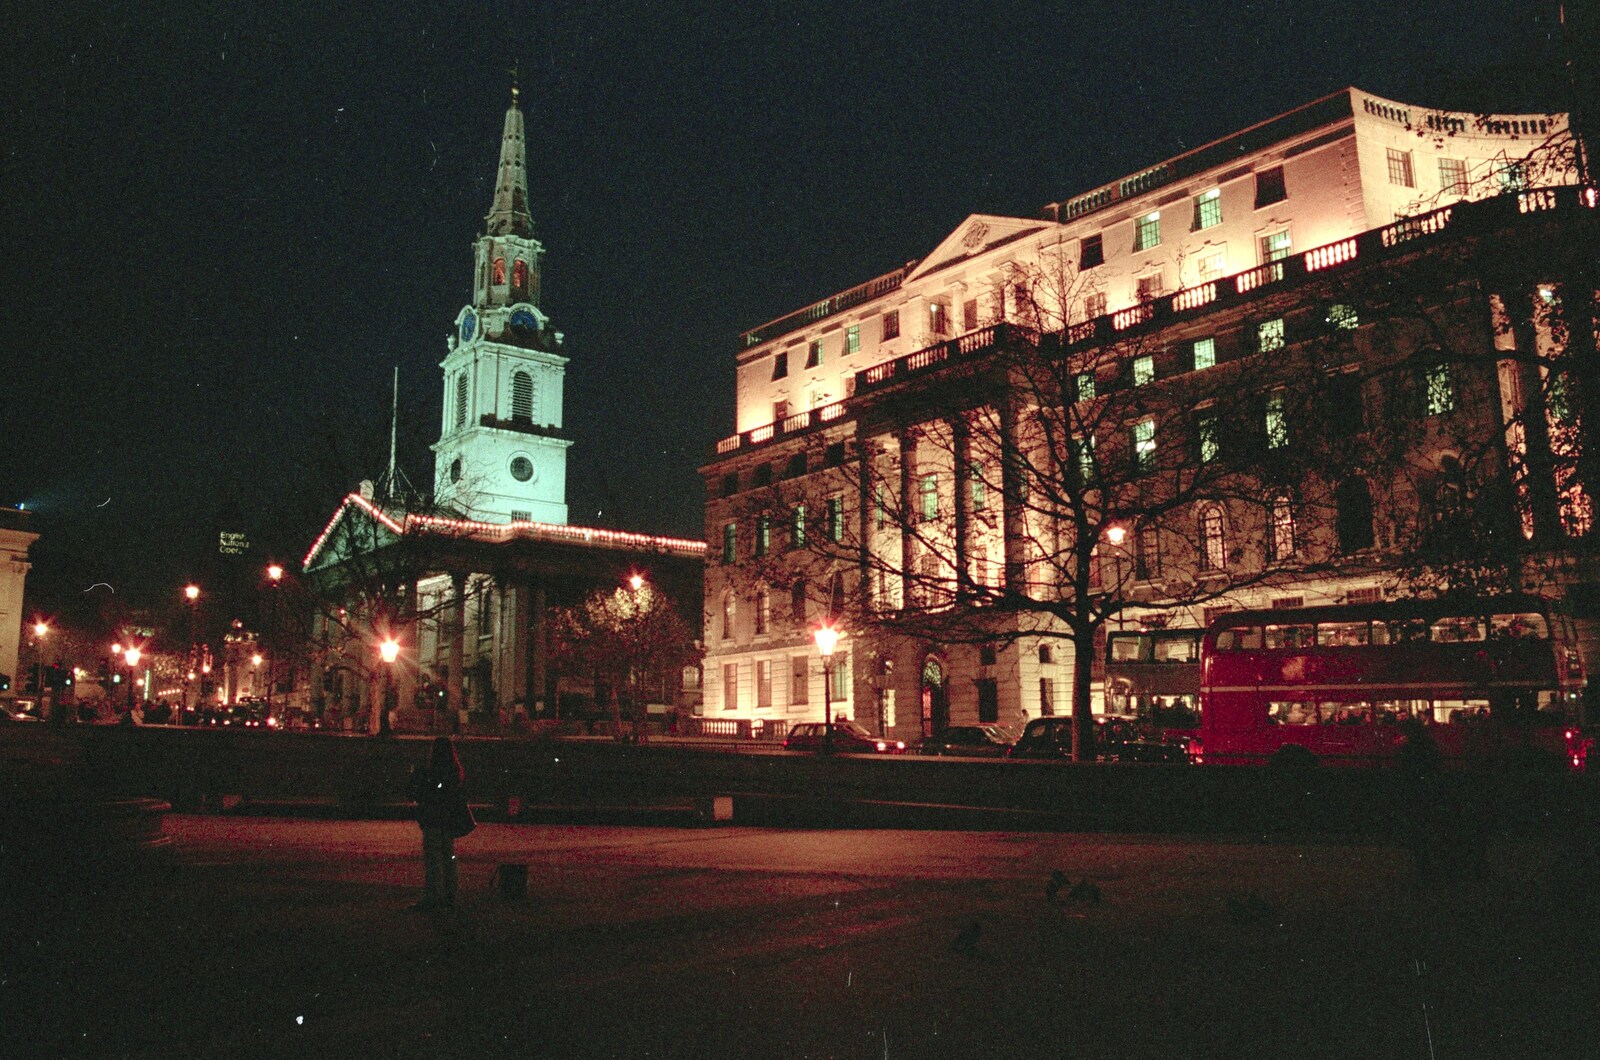 The church of St. Martin in the Fields, London from Pre-Christmas Dinner and a Next-Door Do, Stuston, Suffolk - 20th December 1990